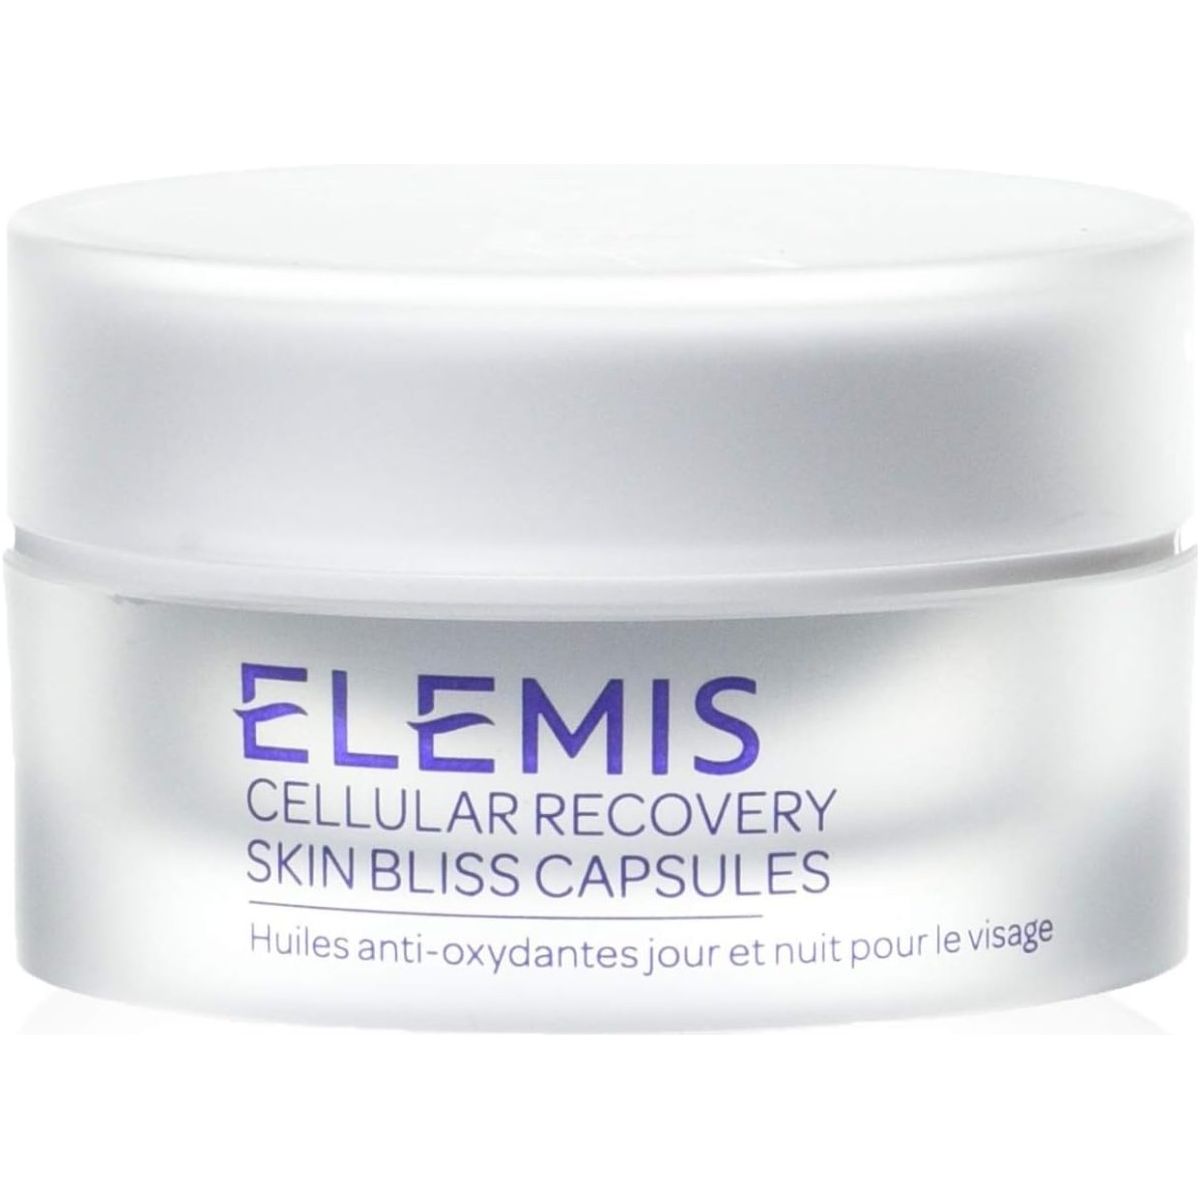 Elemis Cellular Recovery Skin Bliss Capsules 60 Ct - DG International Ventures Limited